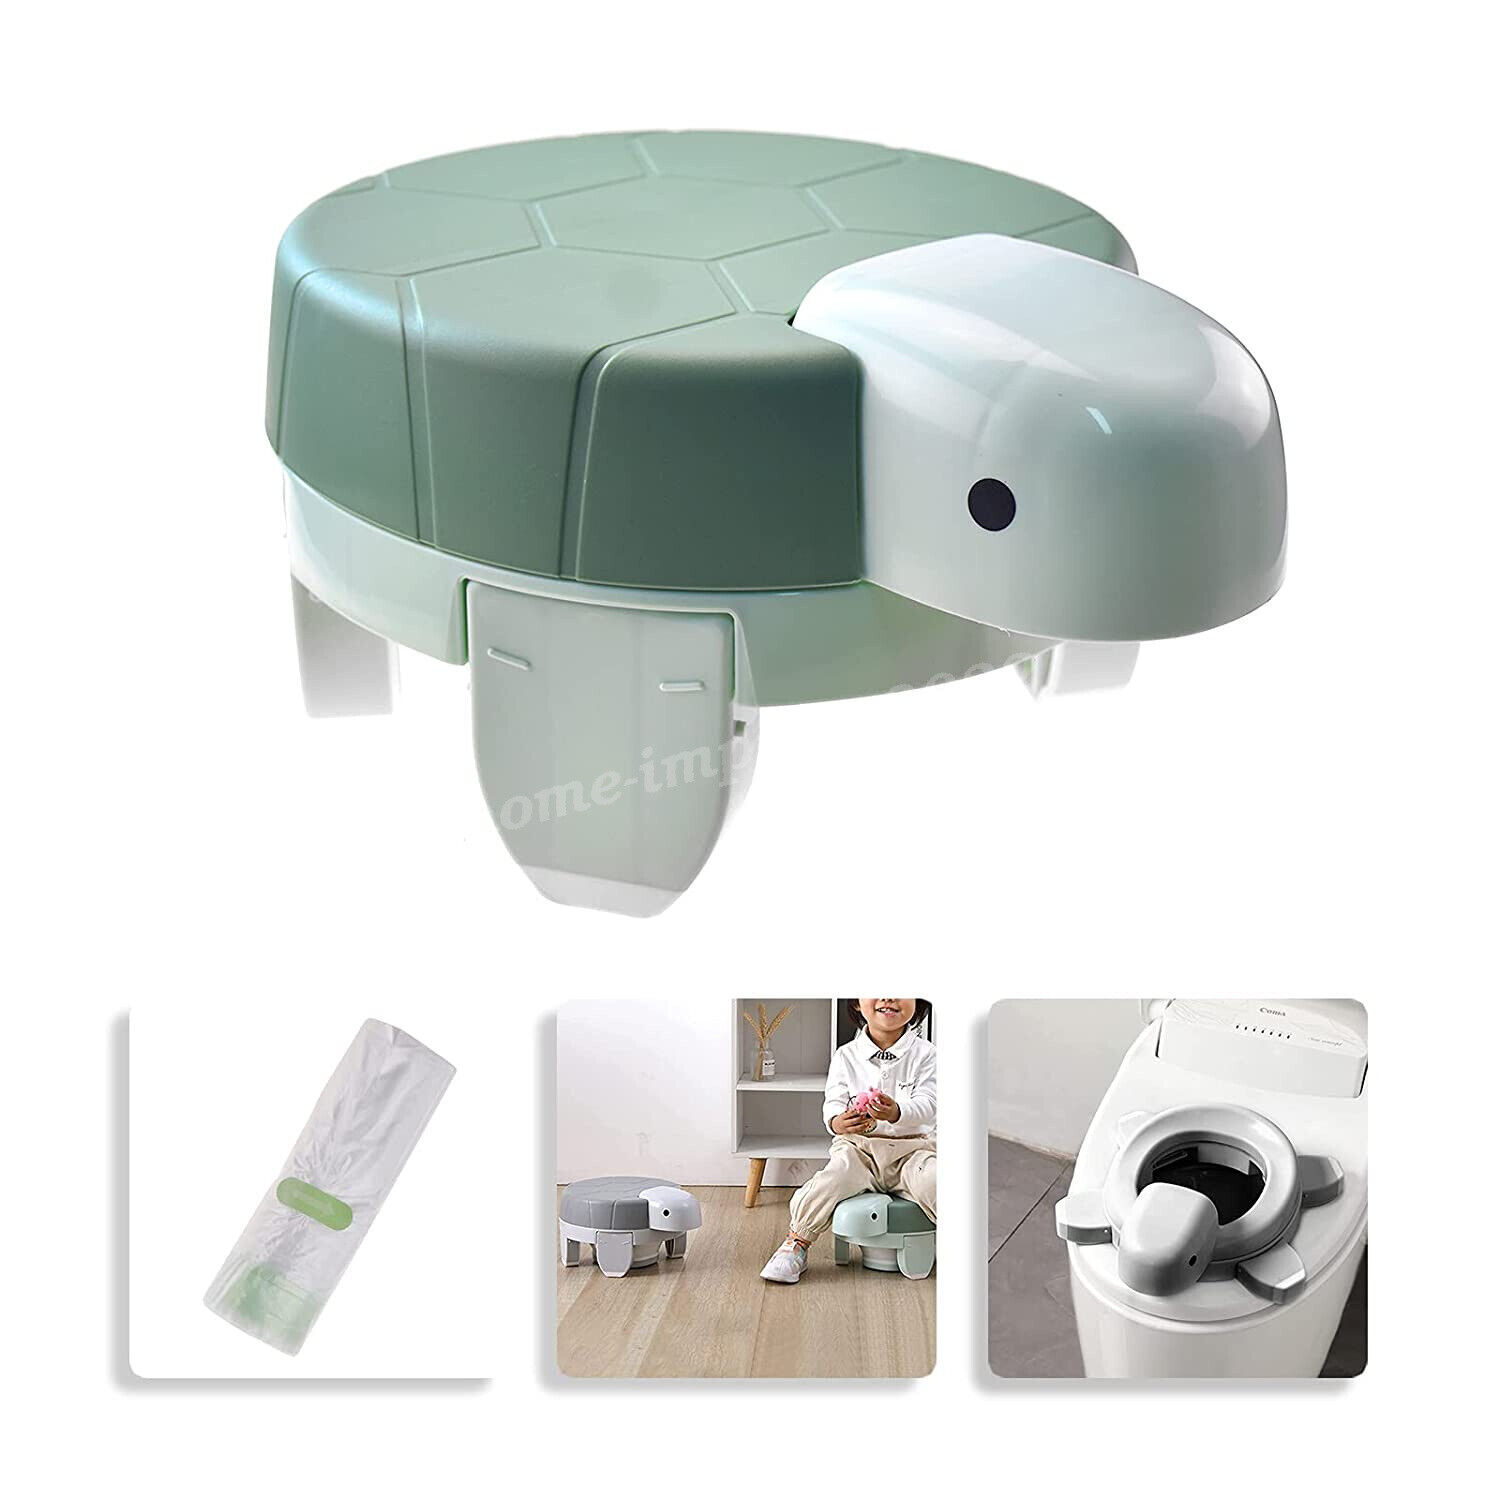 3 in 1 Portable Kids Travel Potty Potty - Training Seat for Toddler Toilet Seat